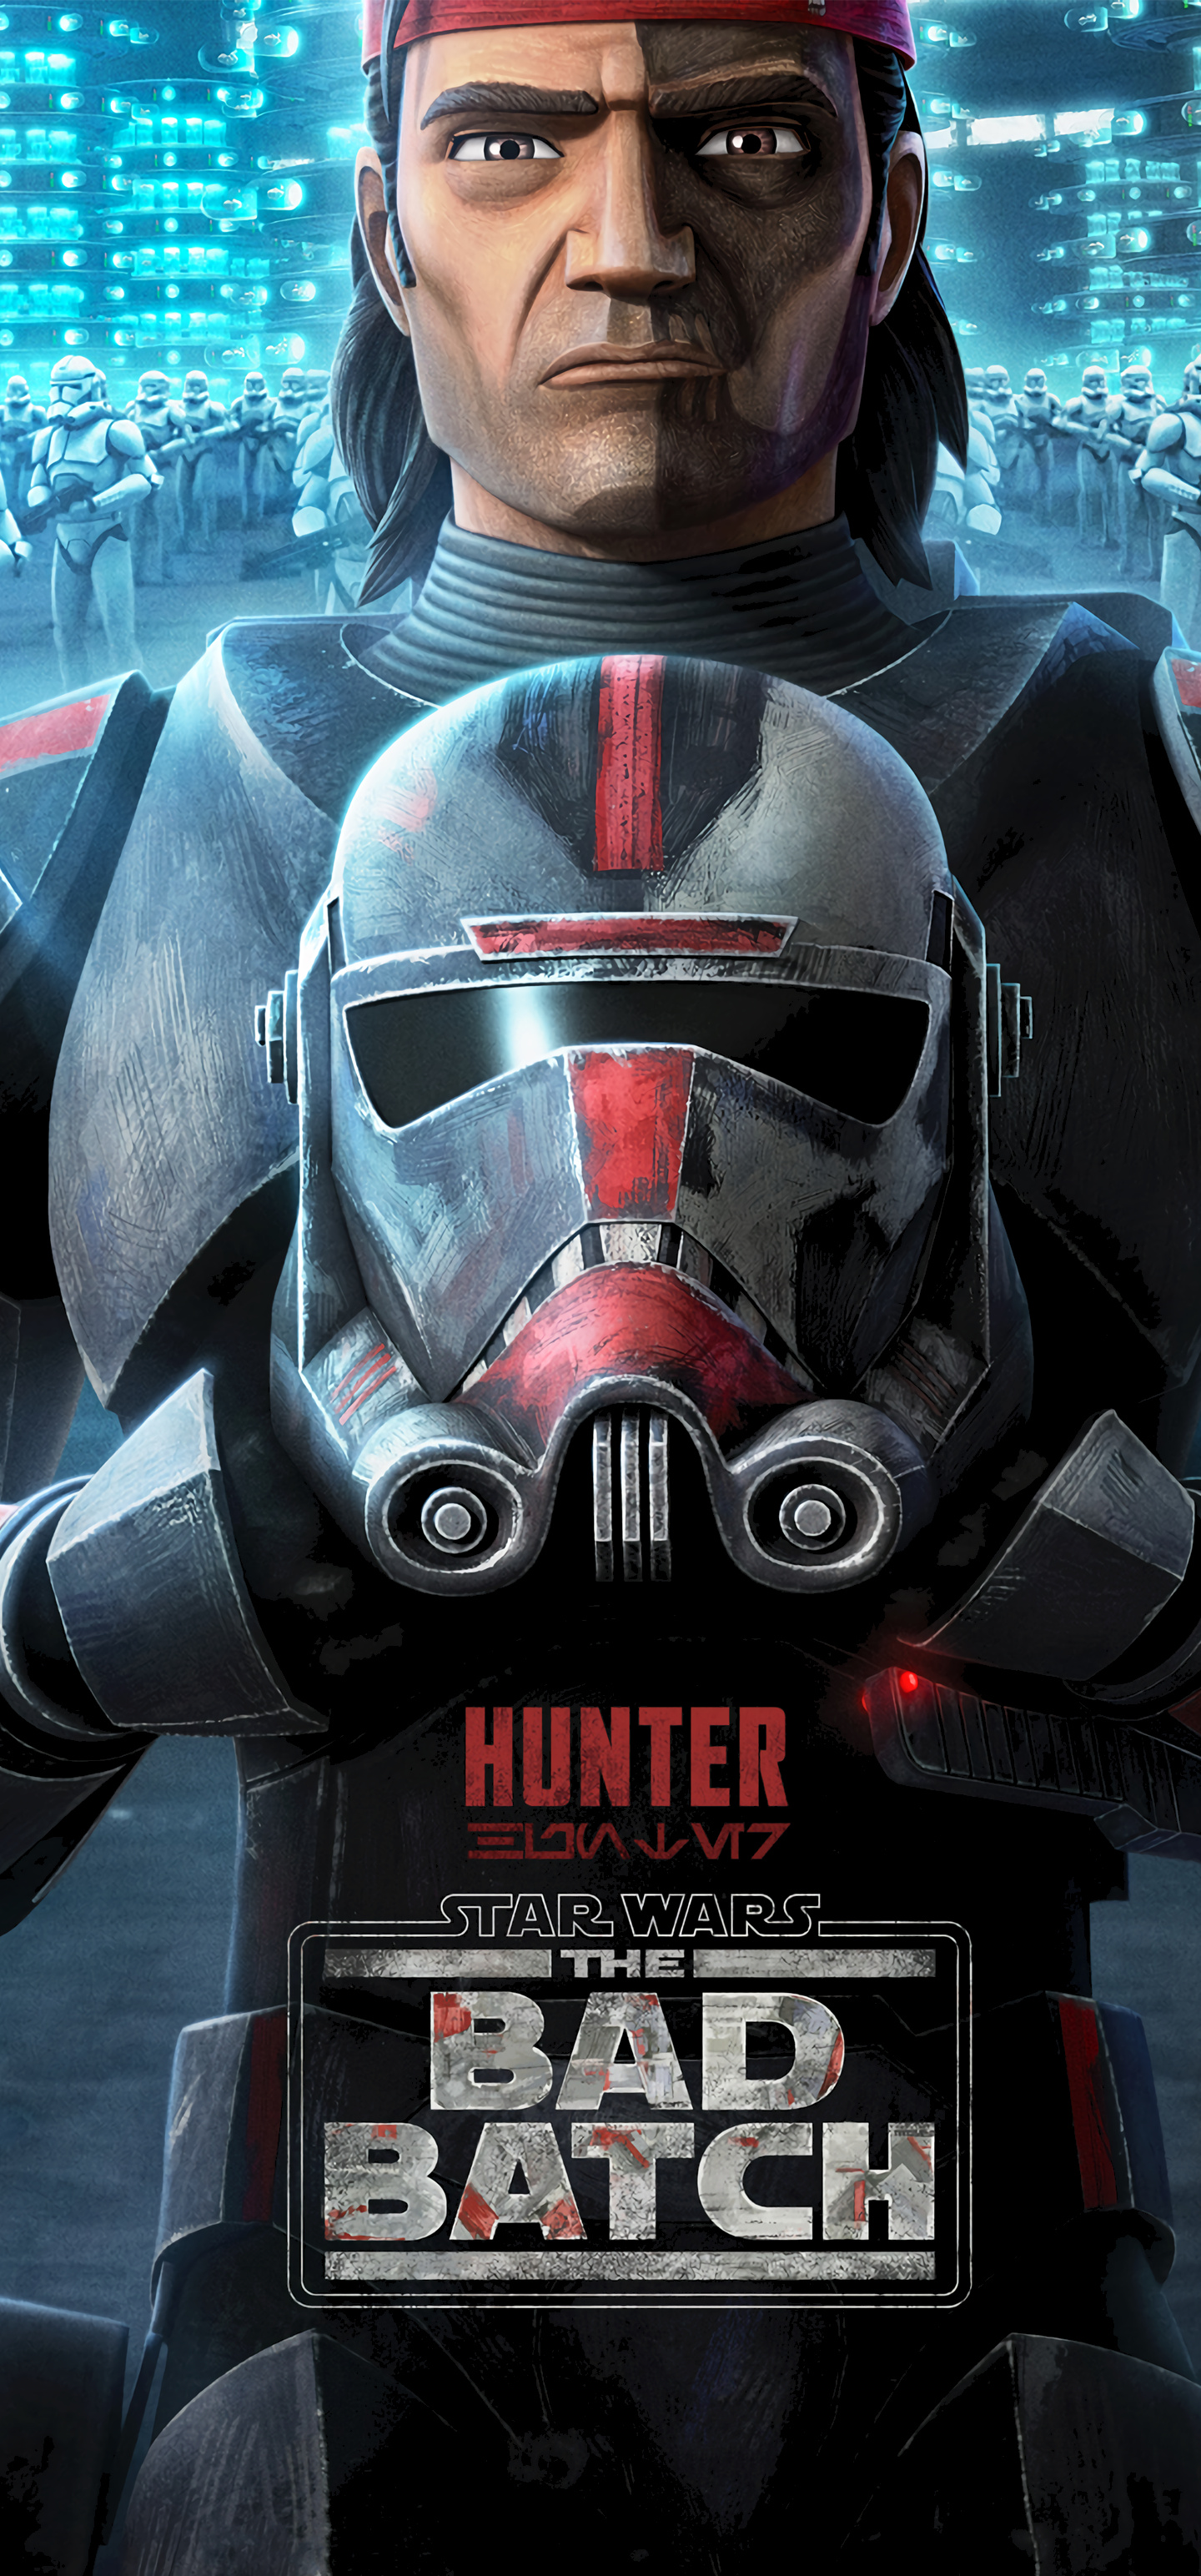 Star Wars: The Bad Batch: Hunter, Genetically altered to have heightened senses and commanded his comrades. 1440x3090 HD Wallpaper.